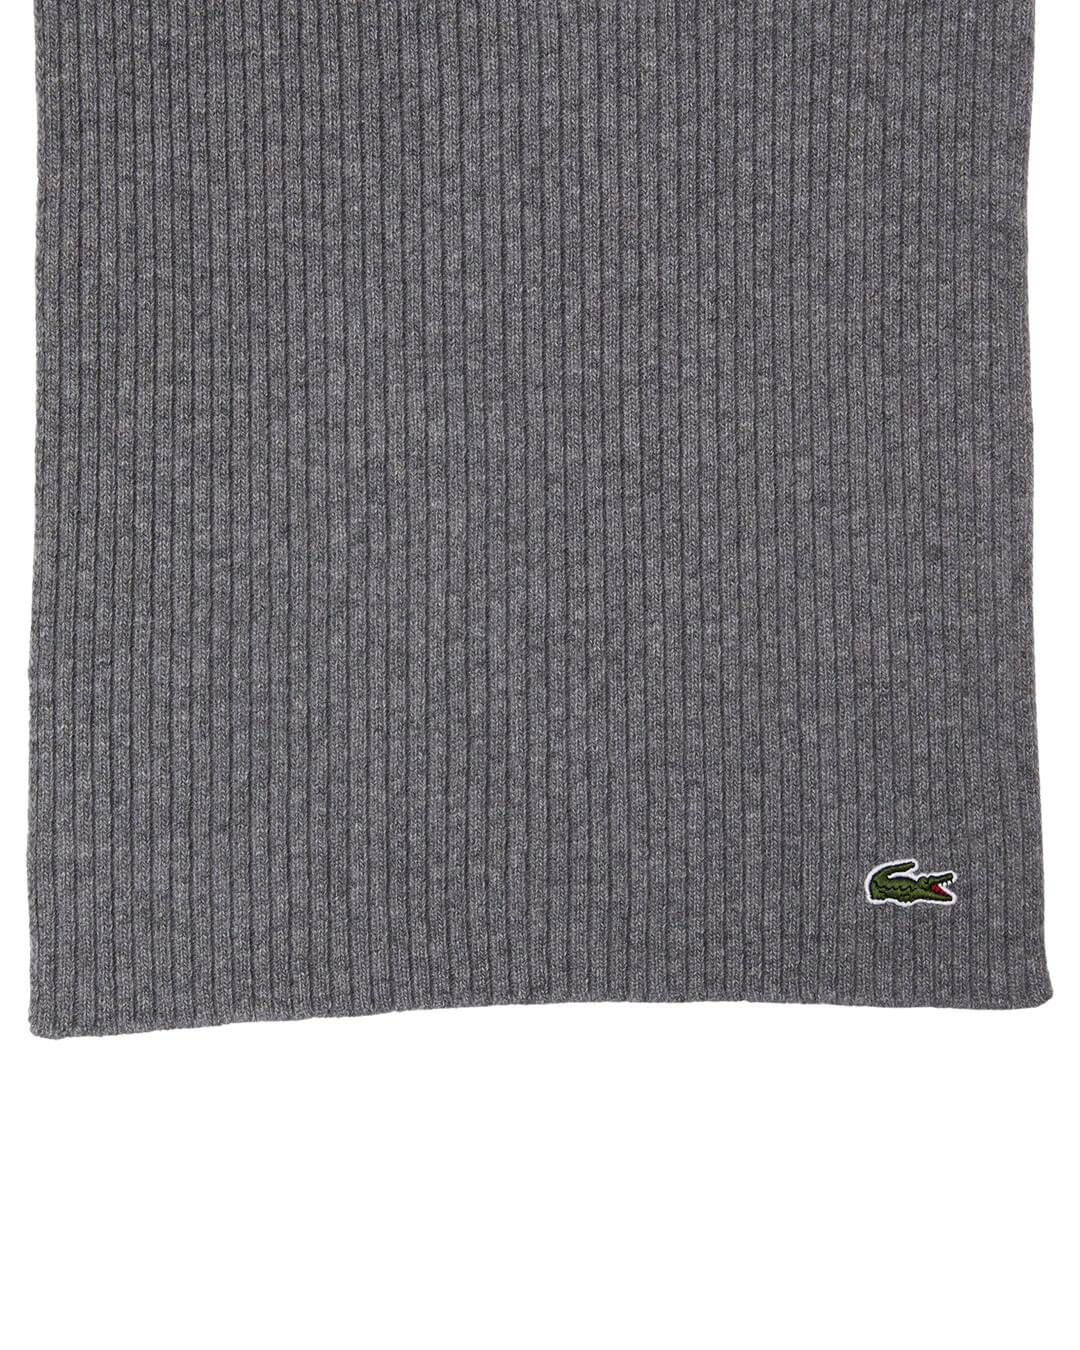 Lacoste Scarves ONE SIZE Lacoste Unisex Ribbed Wool Grey Scarf